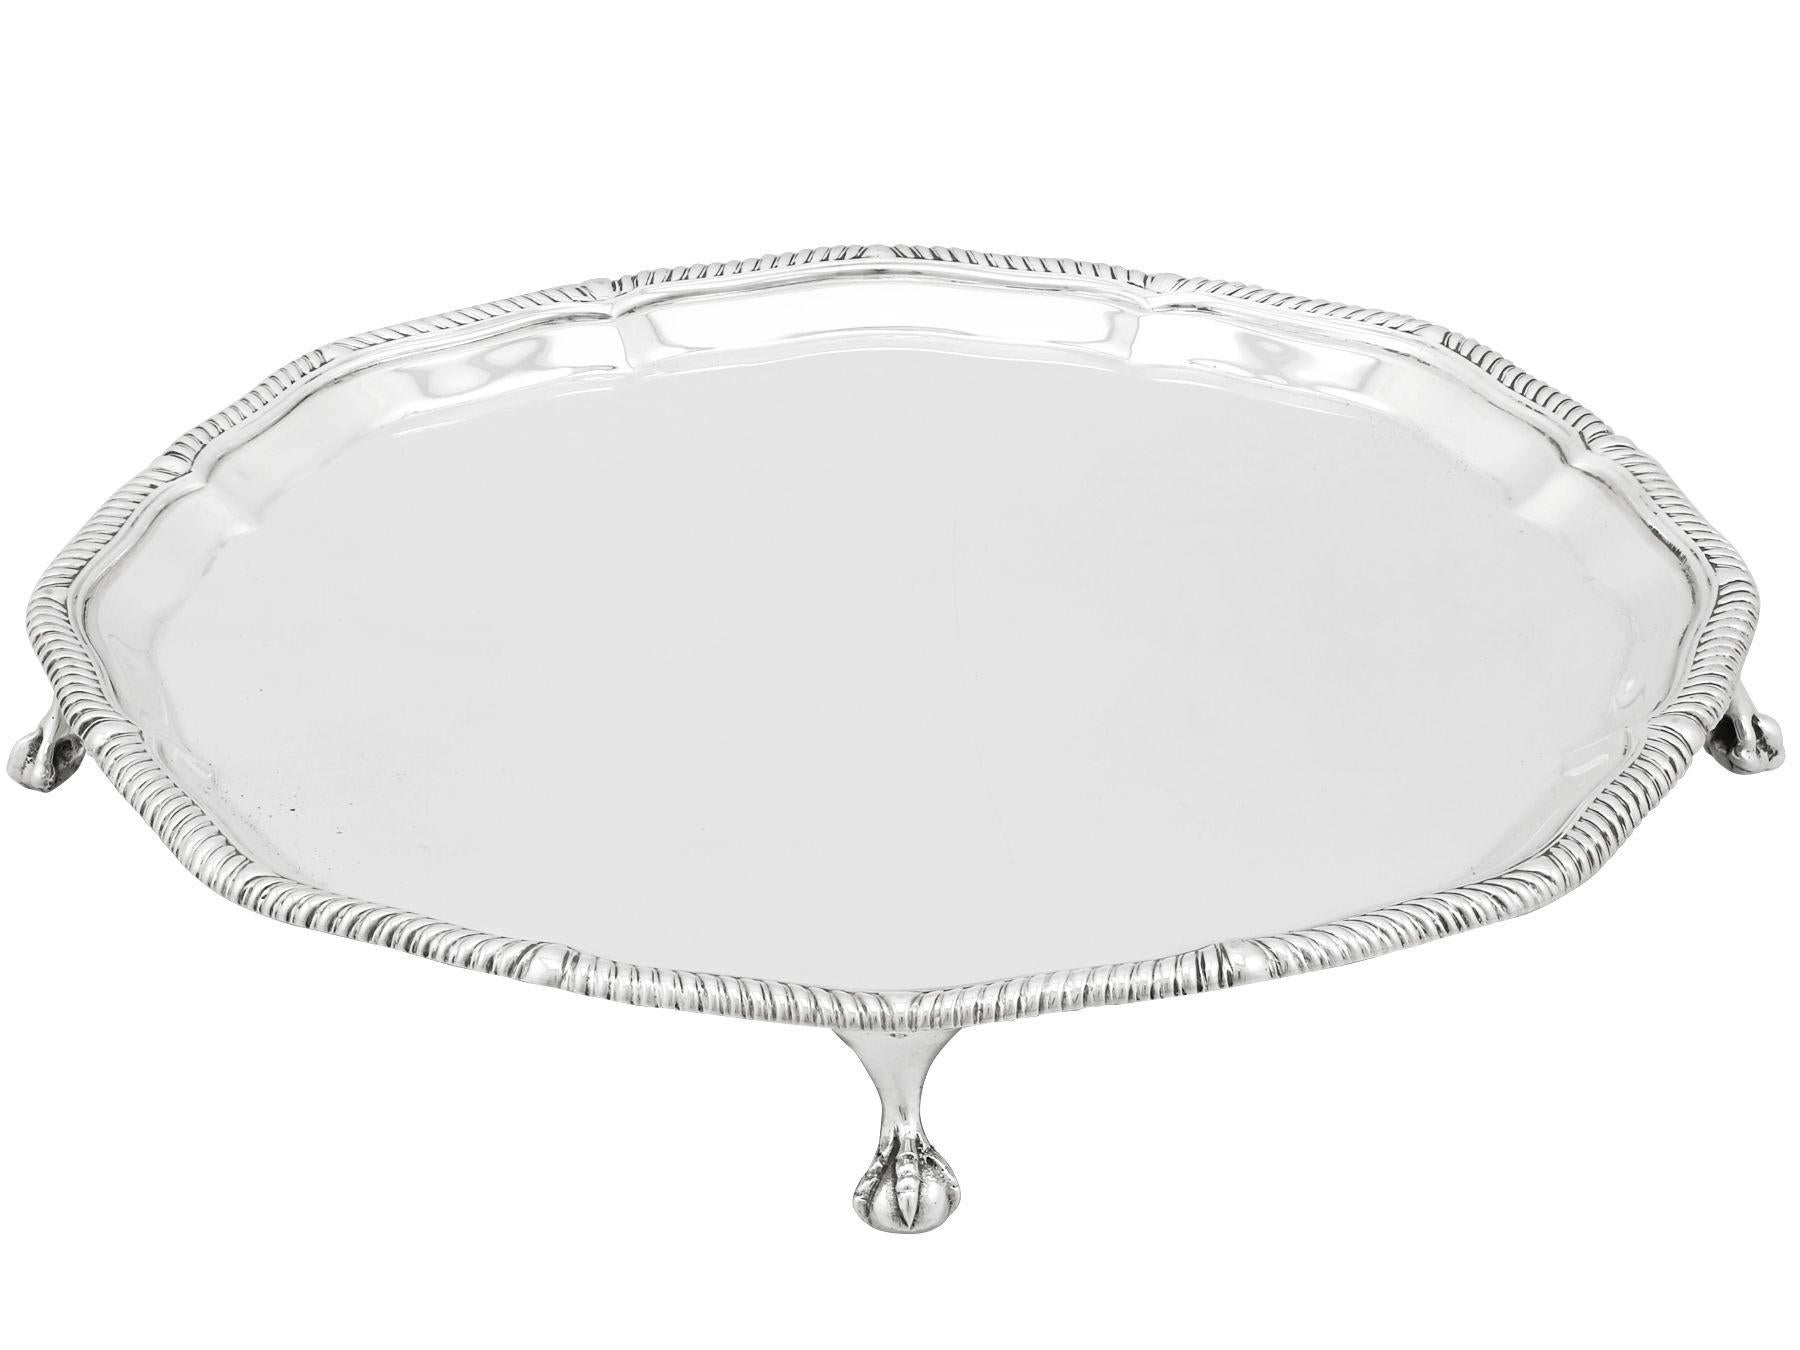 A fine and impressive antique George V English sterling silver waiter made in the George III style; an addition to our dining silverware collection.

This fine antique George V sterling silver waiter has a circular incurved, shaped form.

The